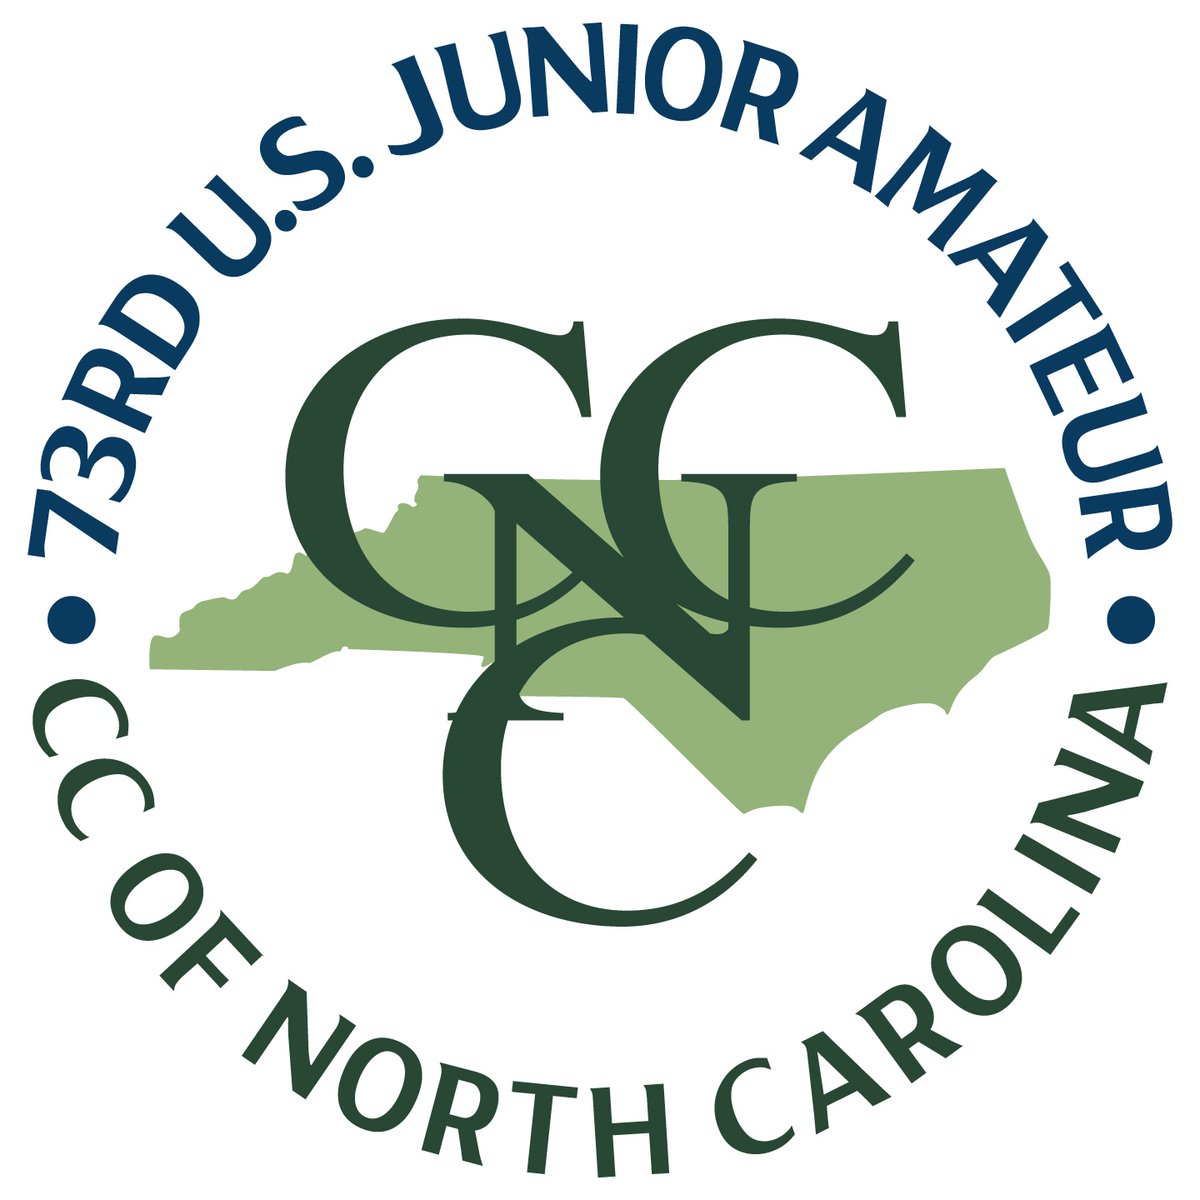 Going to be a great #USJuniorAm final match at @CCNorthCarolina today. Course is amazing! All the Best to Cohen Trolio and @NickDunlap62. Enjoy the experience! Will be watching! @USGA